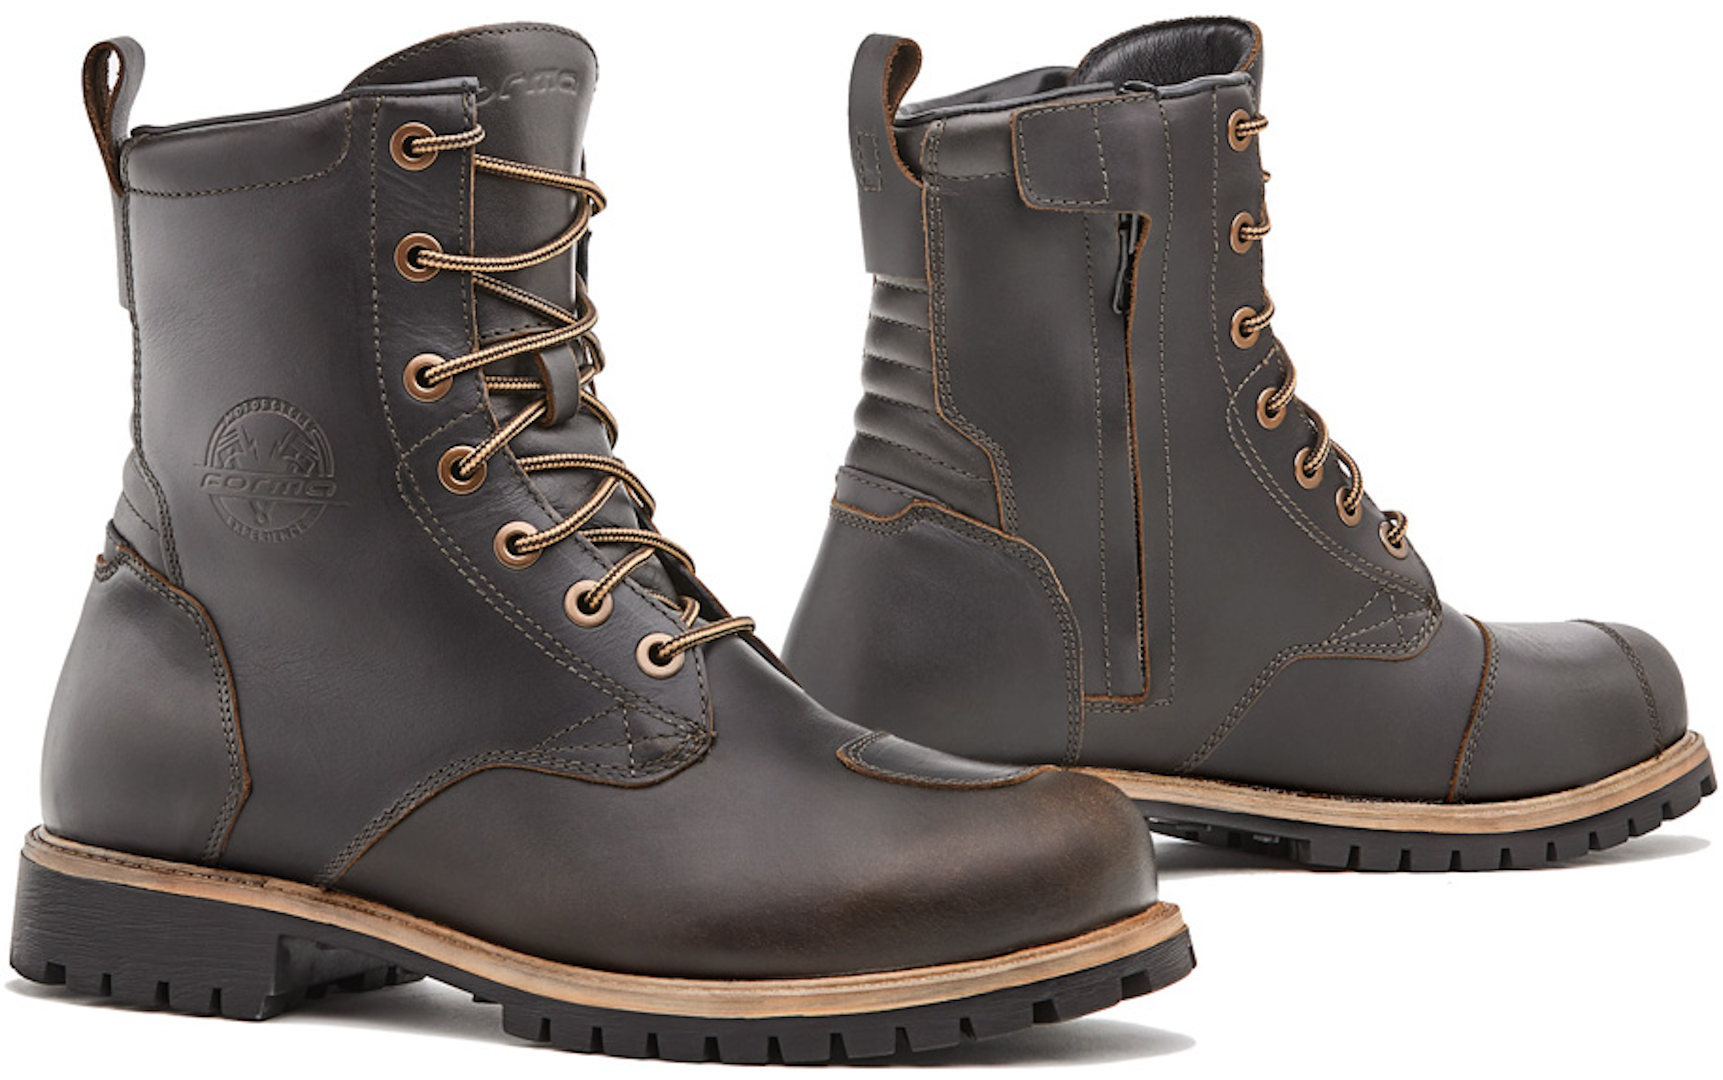 Forma Boots Urban City Legacy Waterproof Boots In Leather And Reinforcements